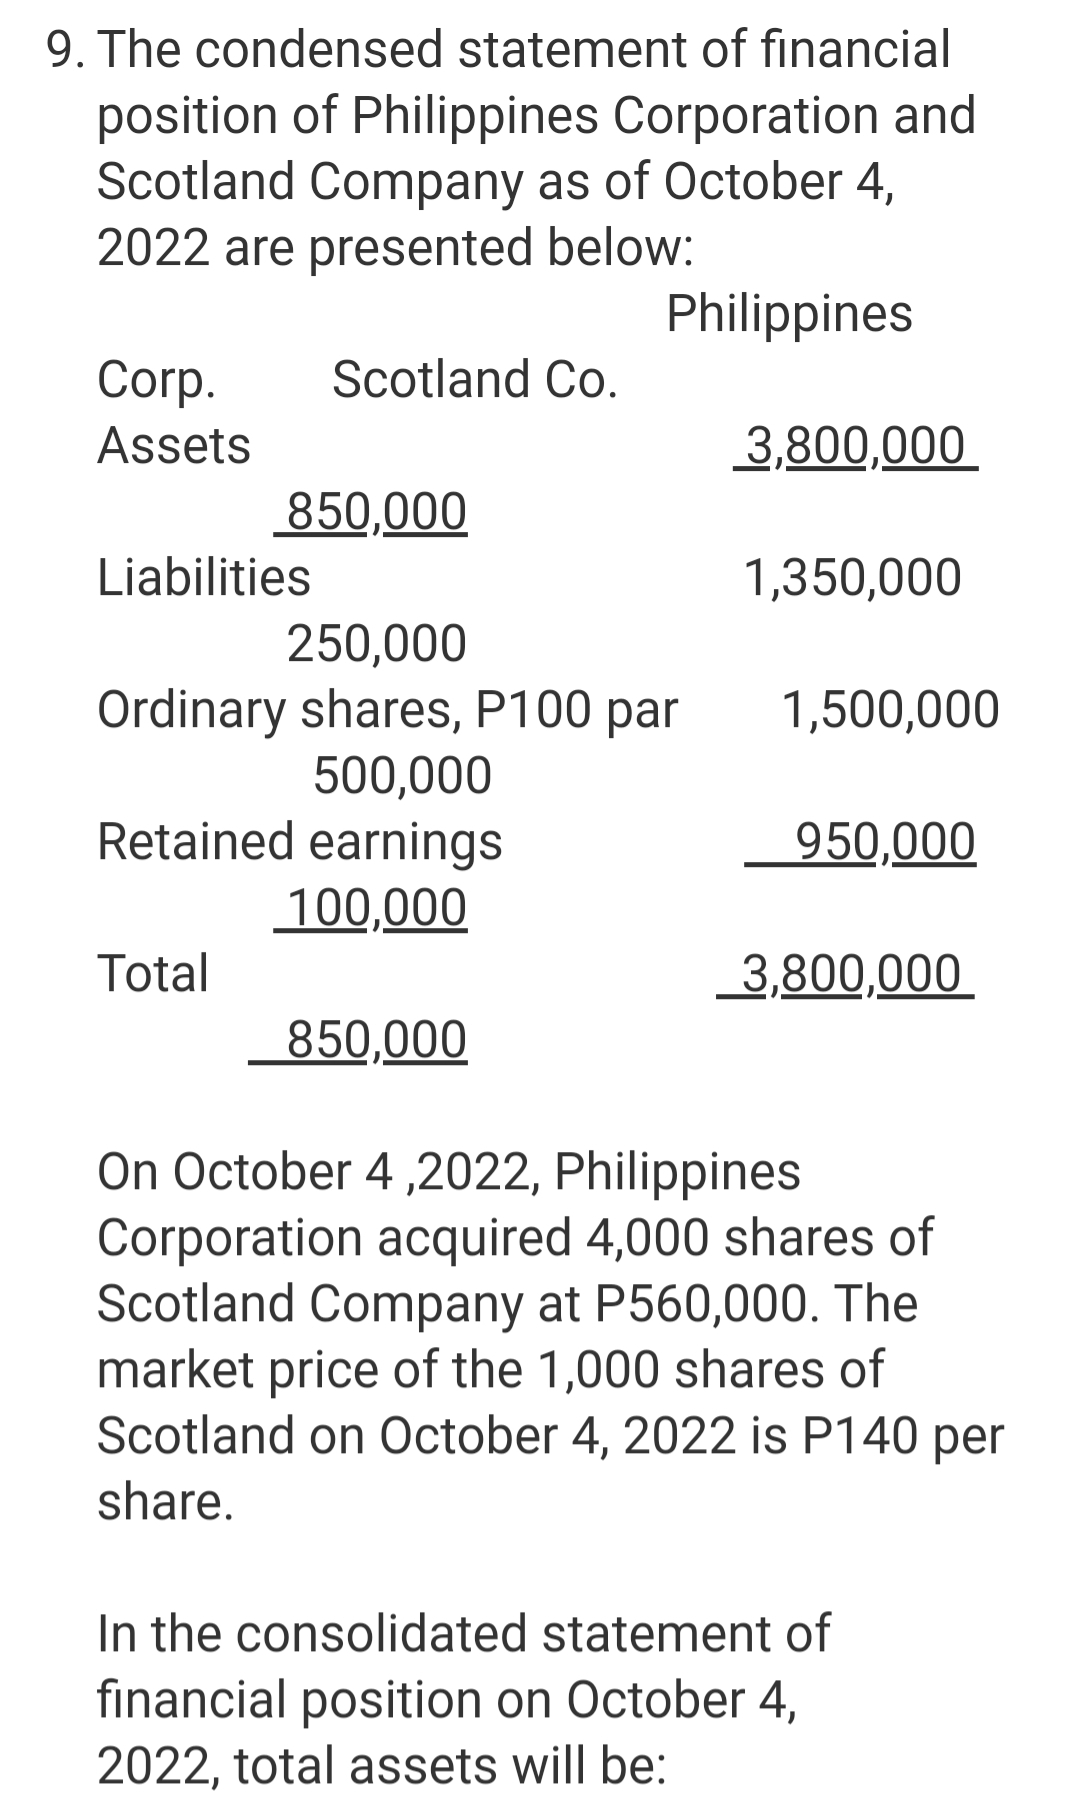 9. The condensed statement of financial
position of Philippines Corporation and
Scotland Company as of October 4,
2022 are presented below:
Philippines
Corp.
Scotland Co.
Assets
3,800,000
850,000
Liabilities
1,350,000
250,000
Ordinary shares, P100 par
500,000
Retained earnings
1,500,000
950,000
100,000
Total
3,800,000
850,000
On October 4 ,2022, Philippines
Corporation acquired 4,000 shares of
Scotland Company at P560,000. The
market price of the 1,000 shares of
Scotland on October 4, 2022 is P140 per
share.
In the consolidated statement of
financial position on October 4,
2022, total assets will be:
